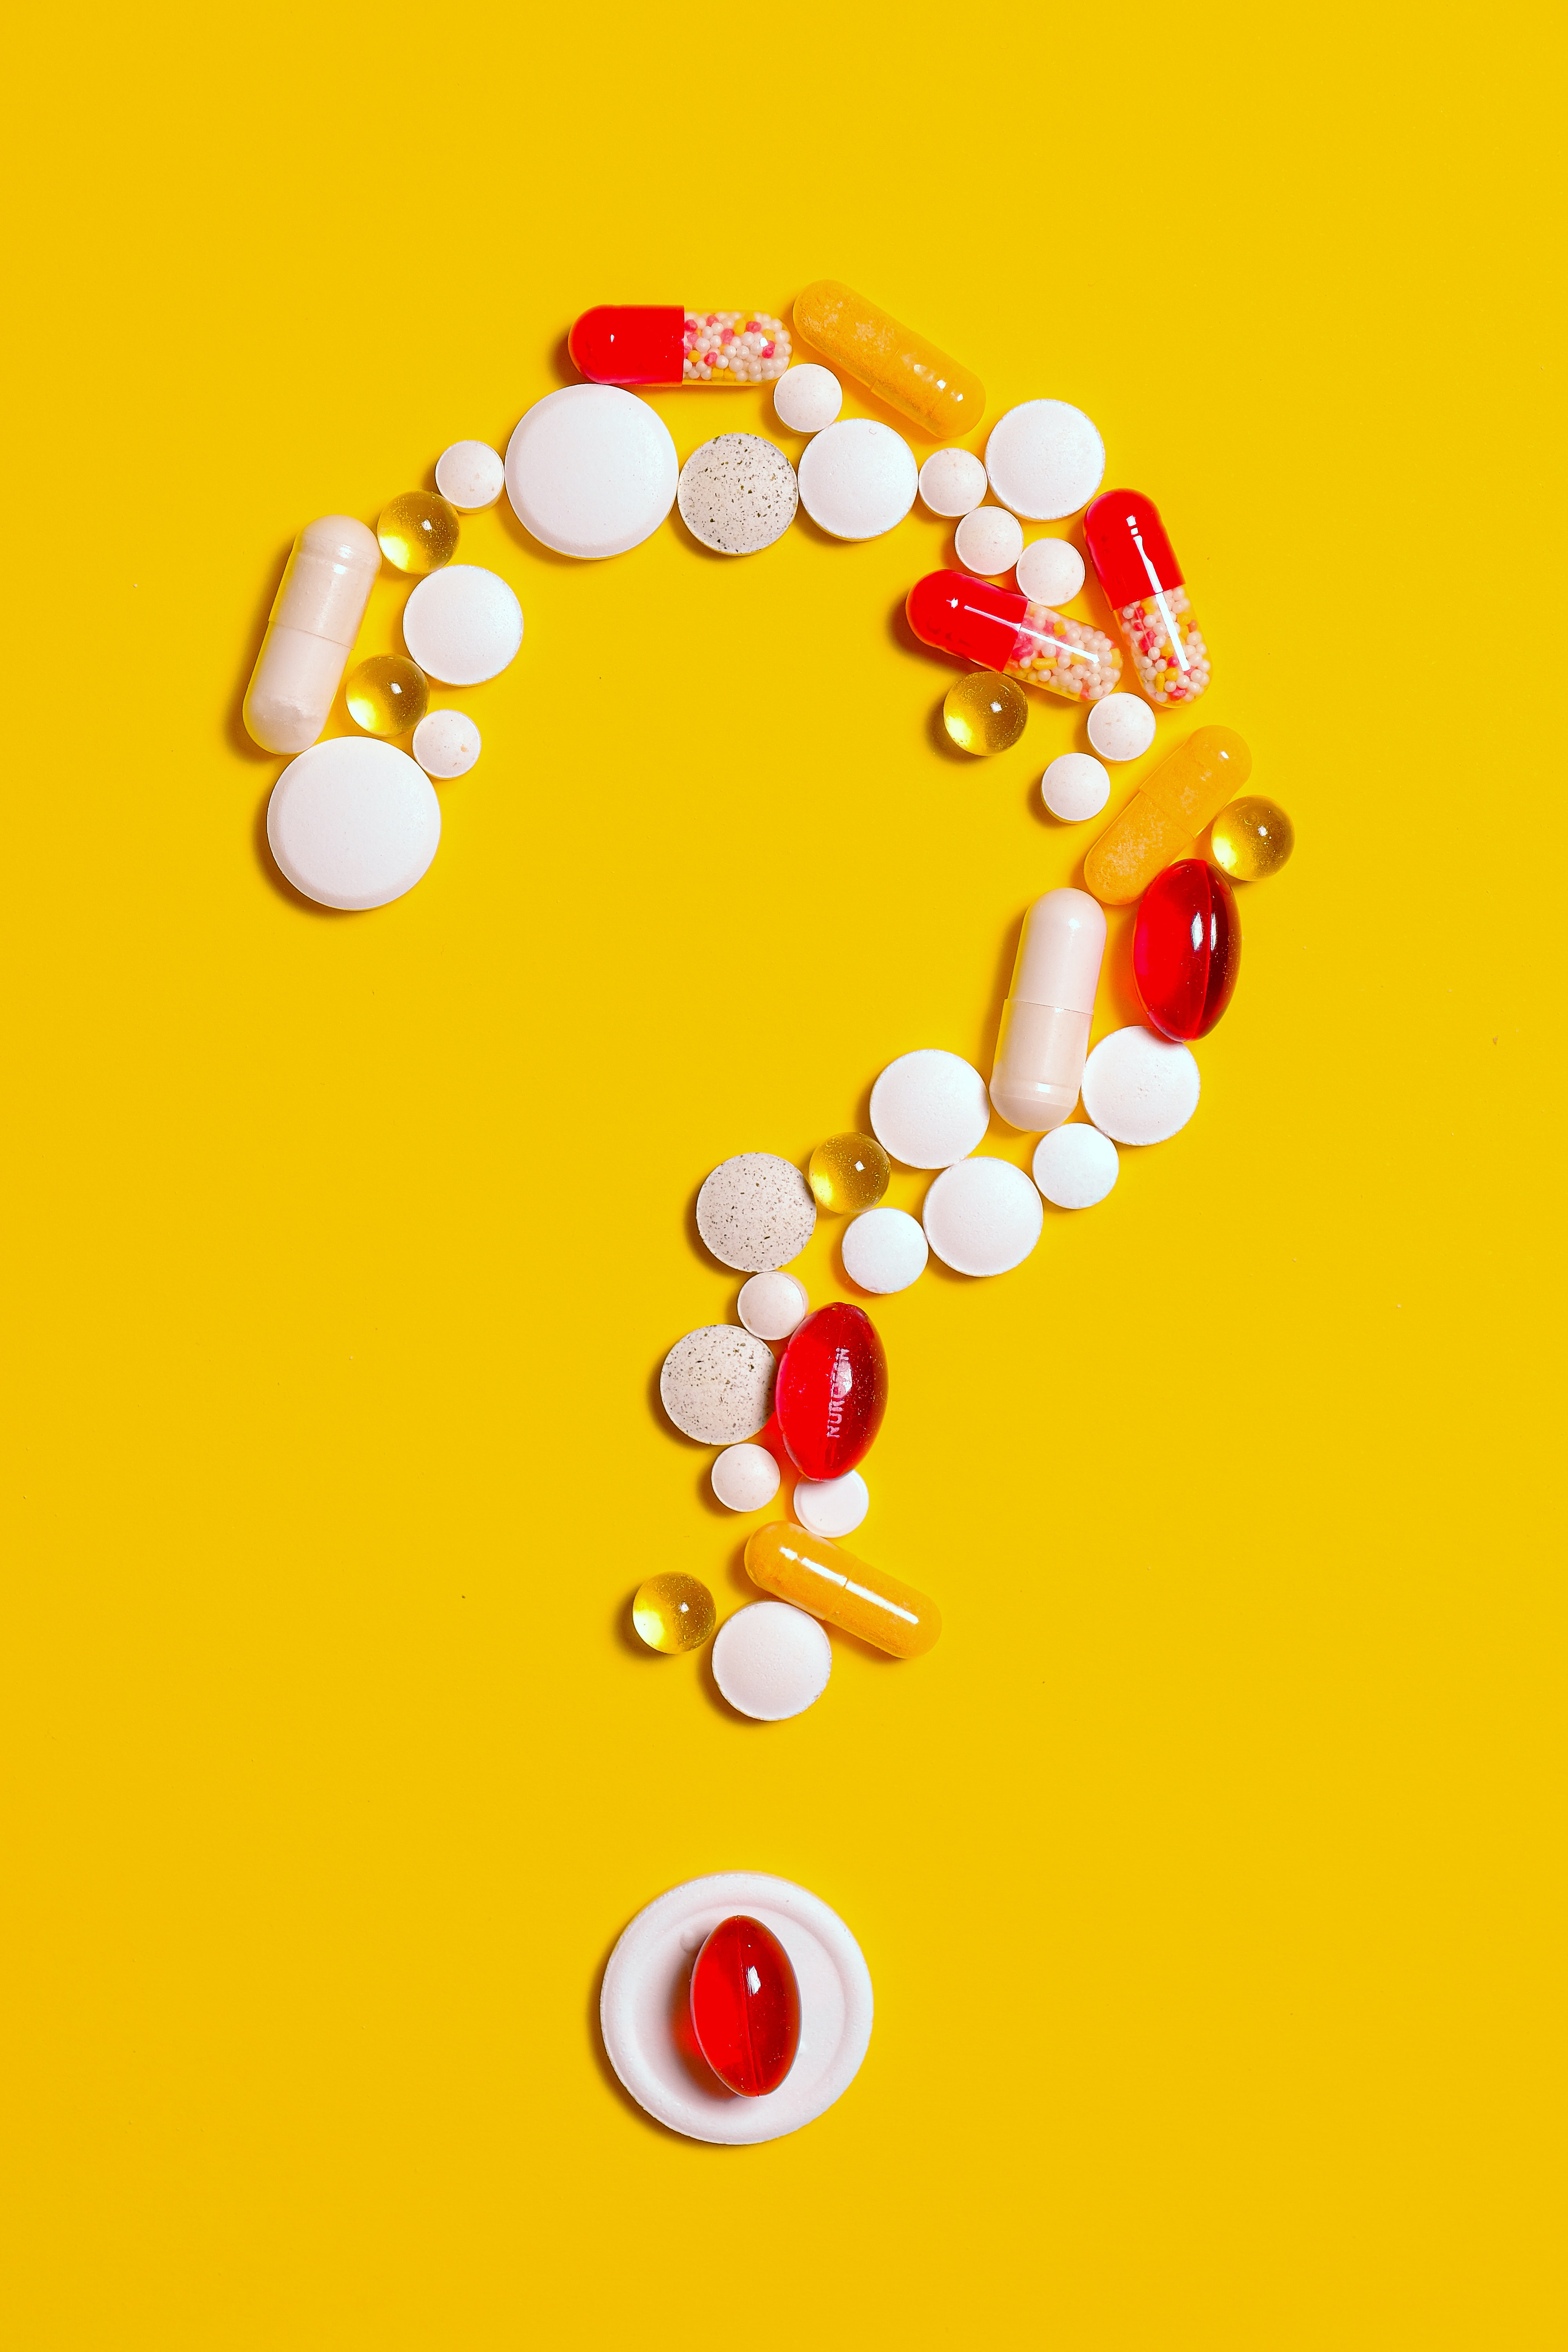 Pills in the form of a question mark